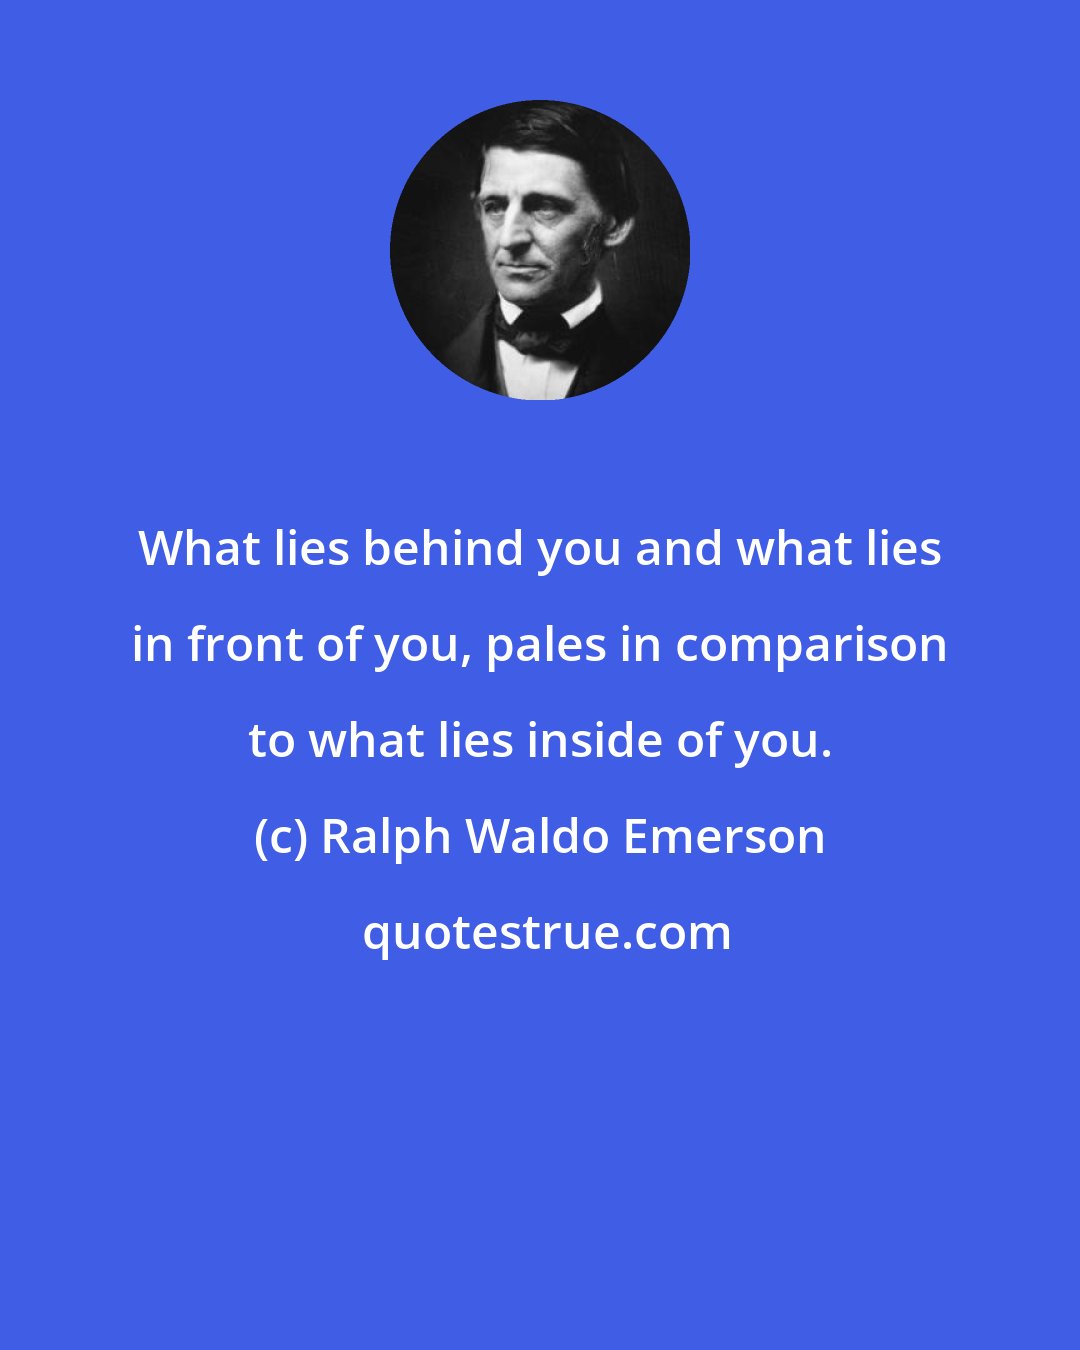 Ralph Waldo Emerson: What lies behind you and what lies in front of you, pales in comparison to what lies inside of you.